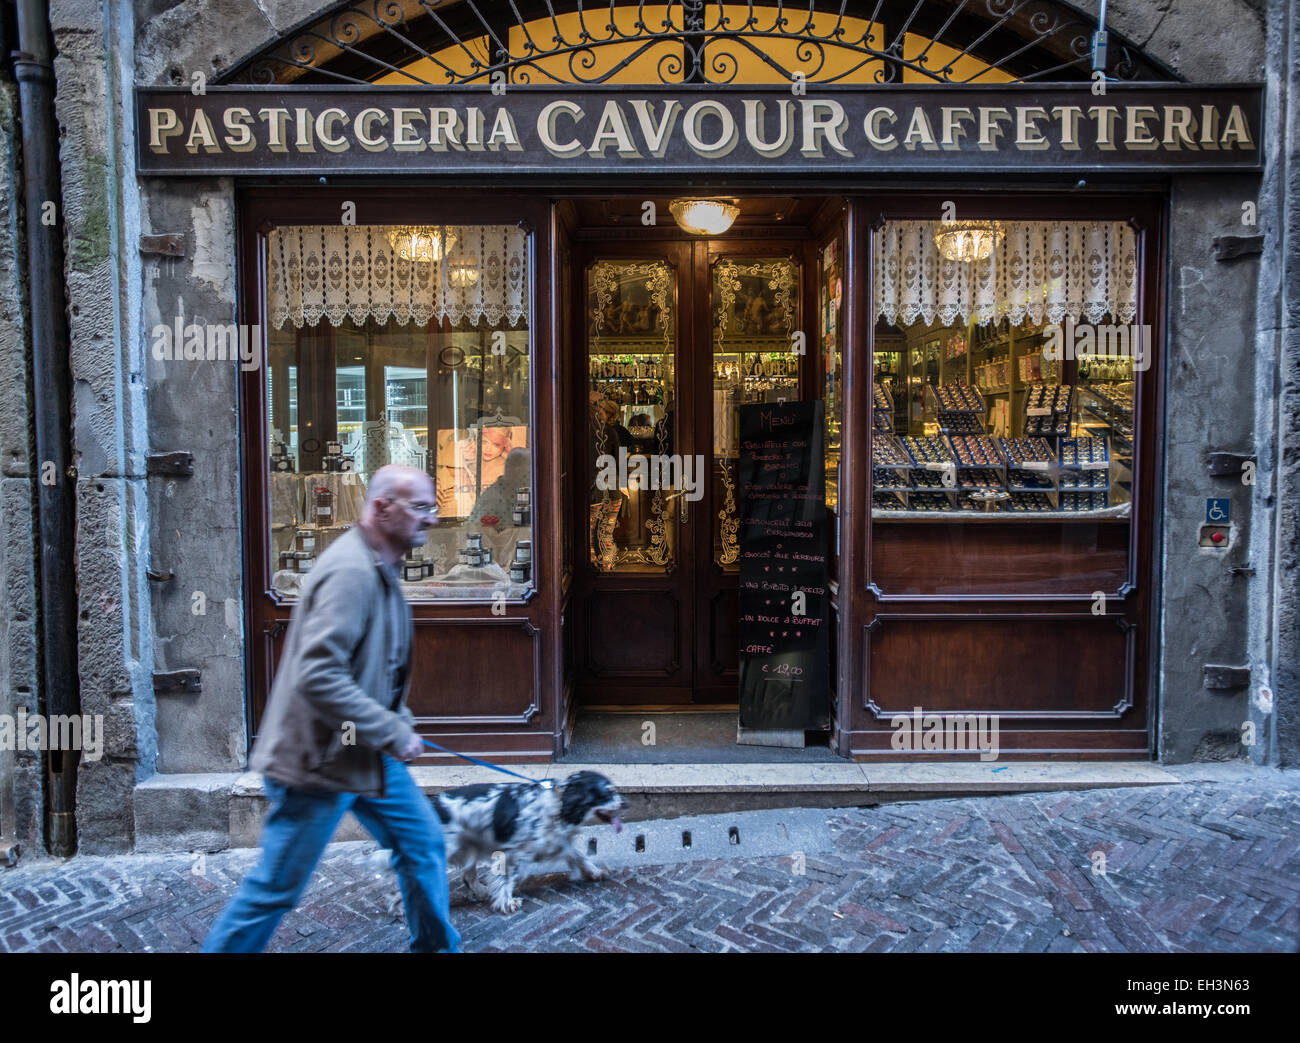 Bergamo, Italy - A man with a dog walks in front of pastry shop Pasticceria, Caffetteria Cavour in Via Gombito, in the old town Stock Photo